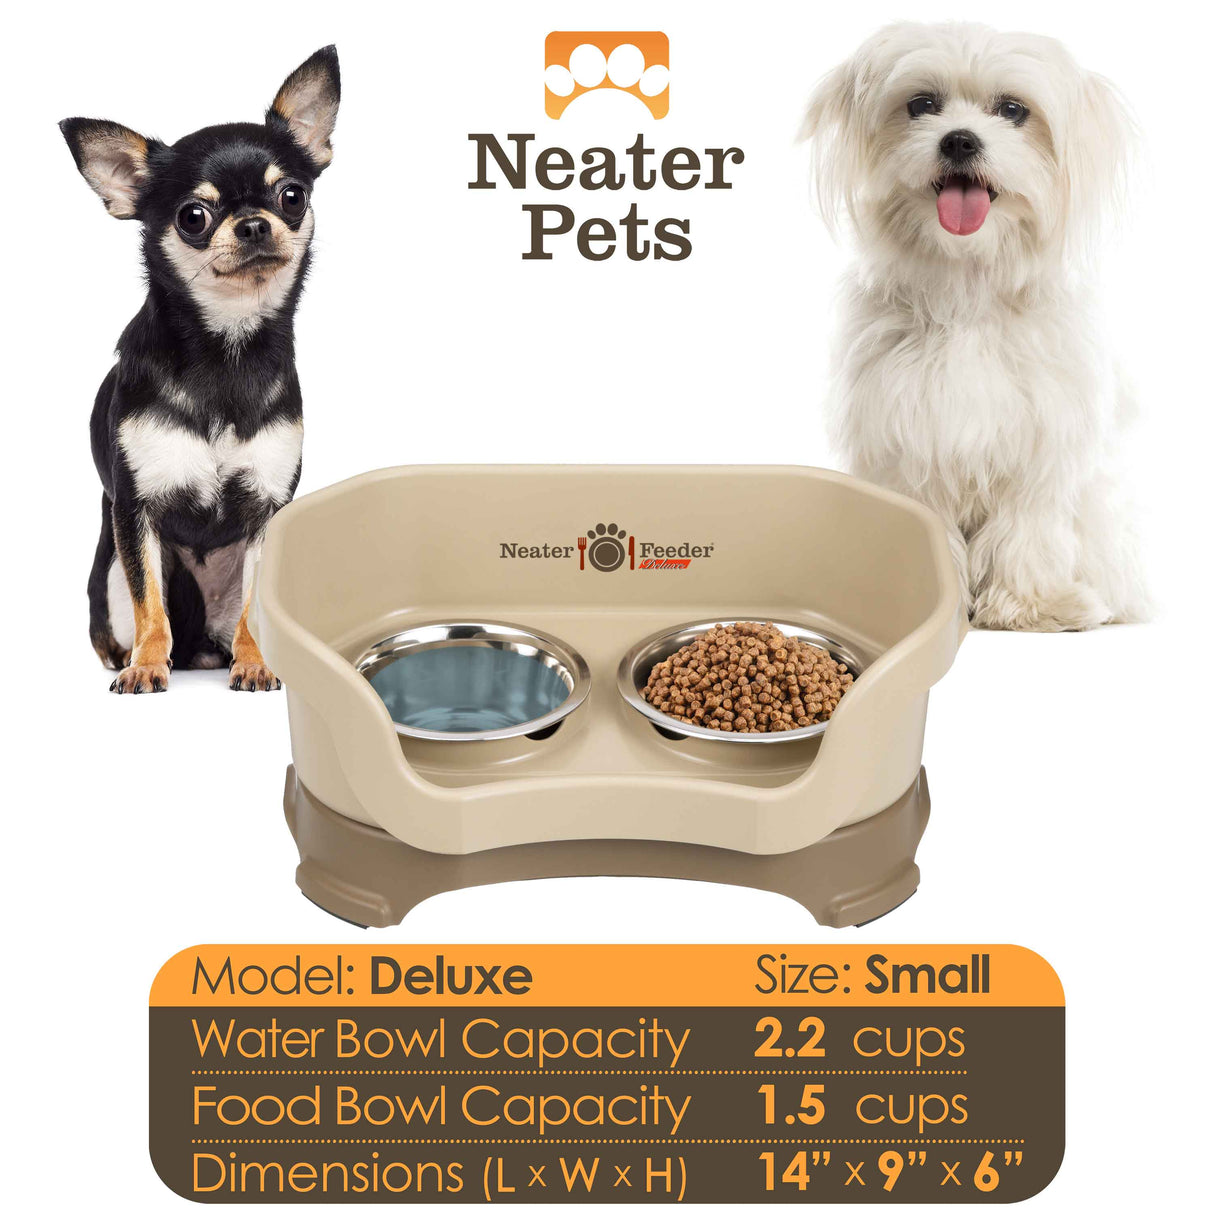 Deluxe small bowl capacity and dimensions